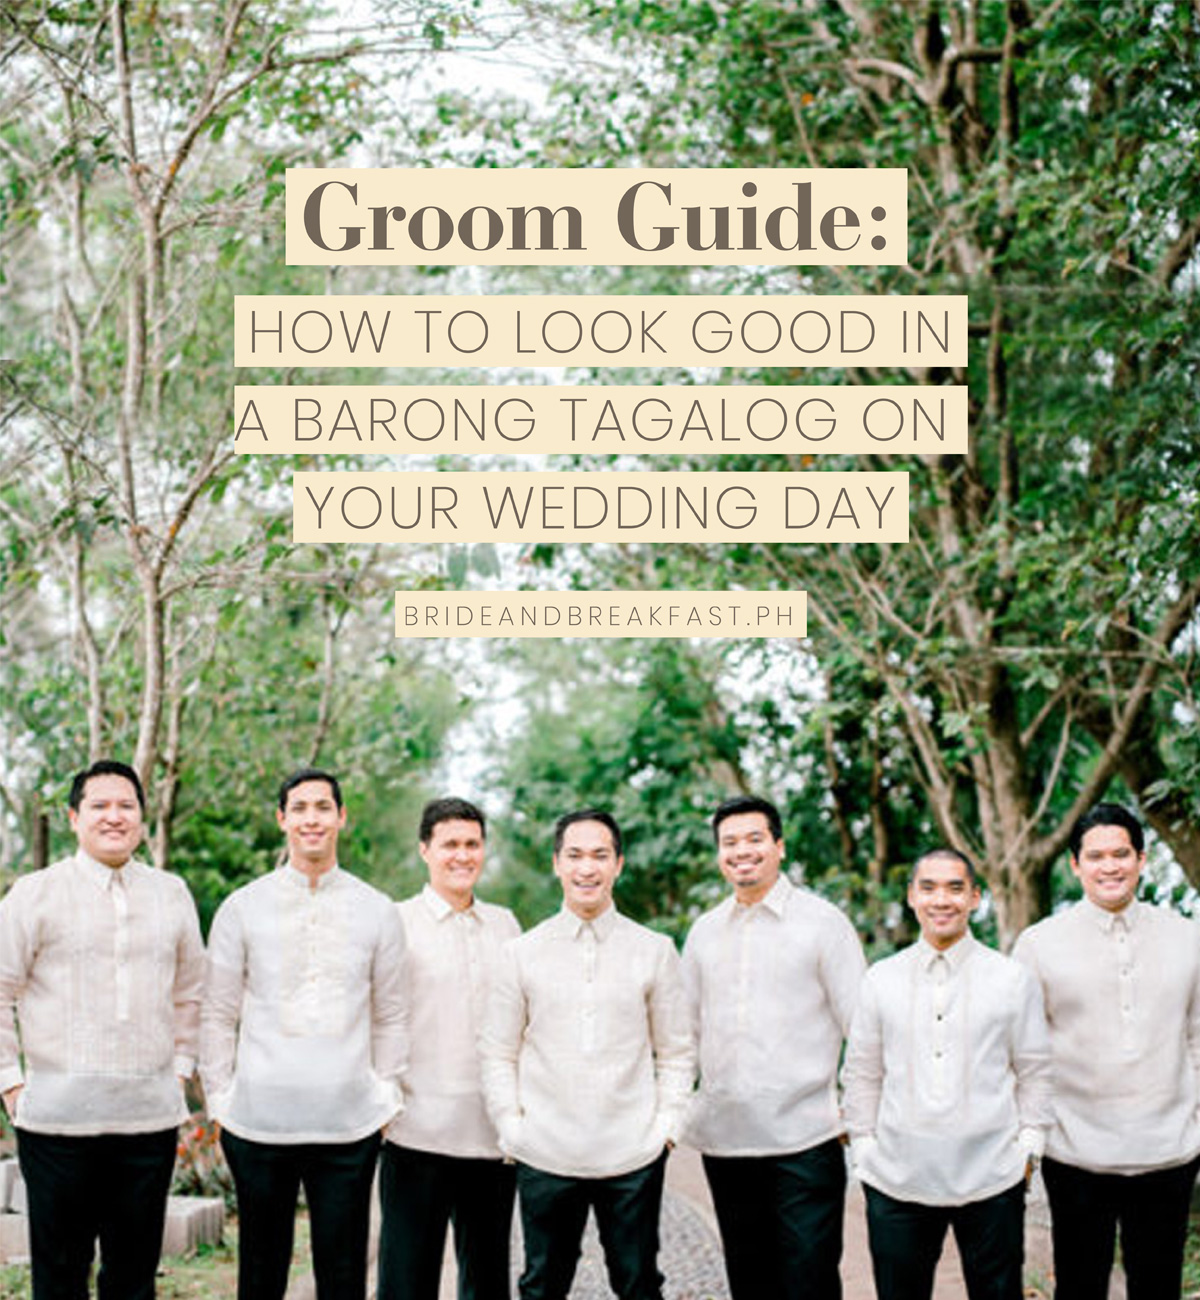 Groom Guide: How to Look Good in a Barong Tagalog on Your Wedding Day